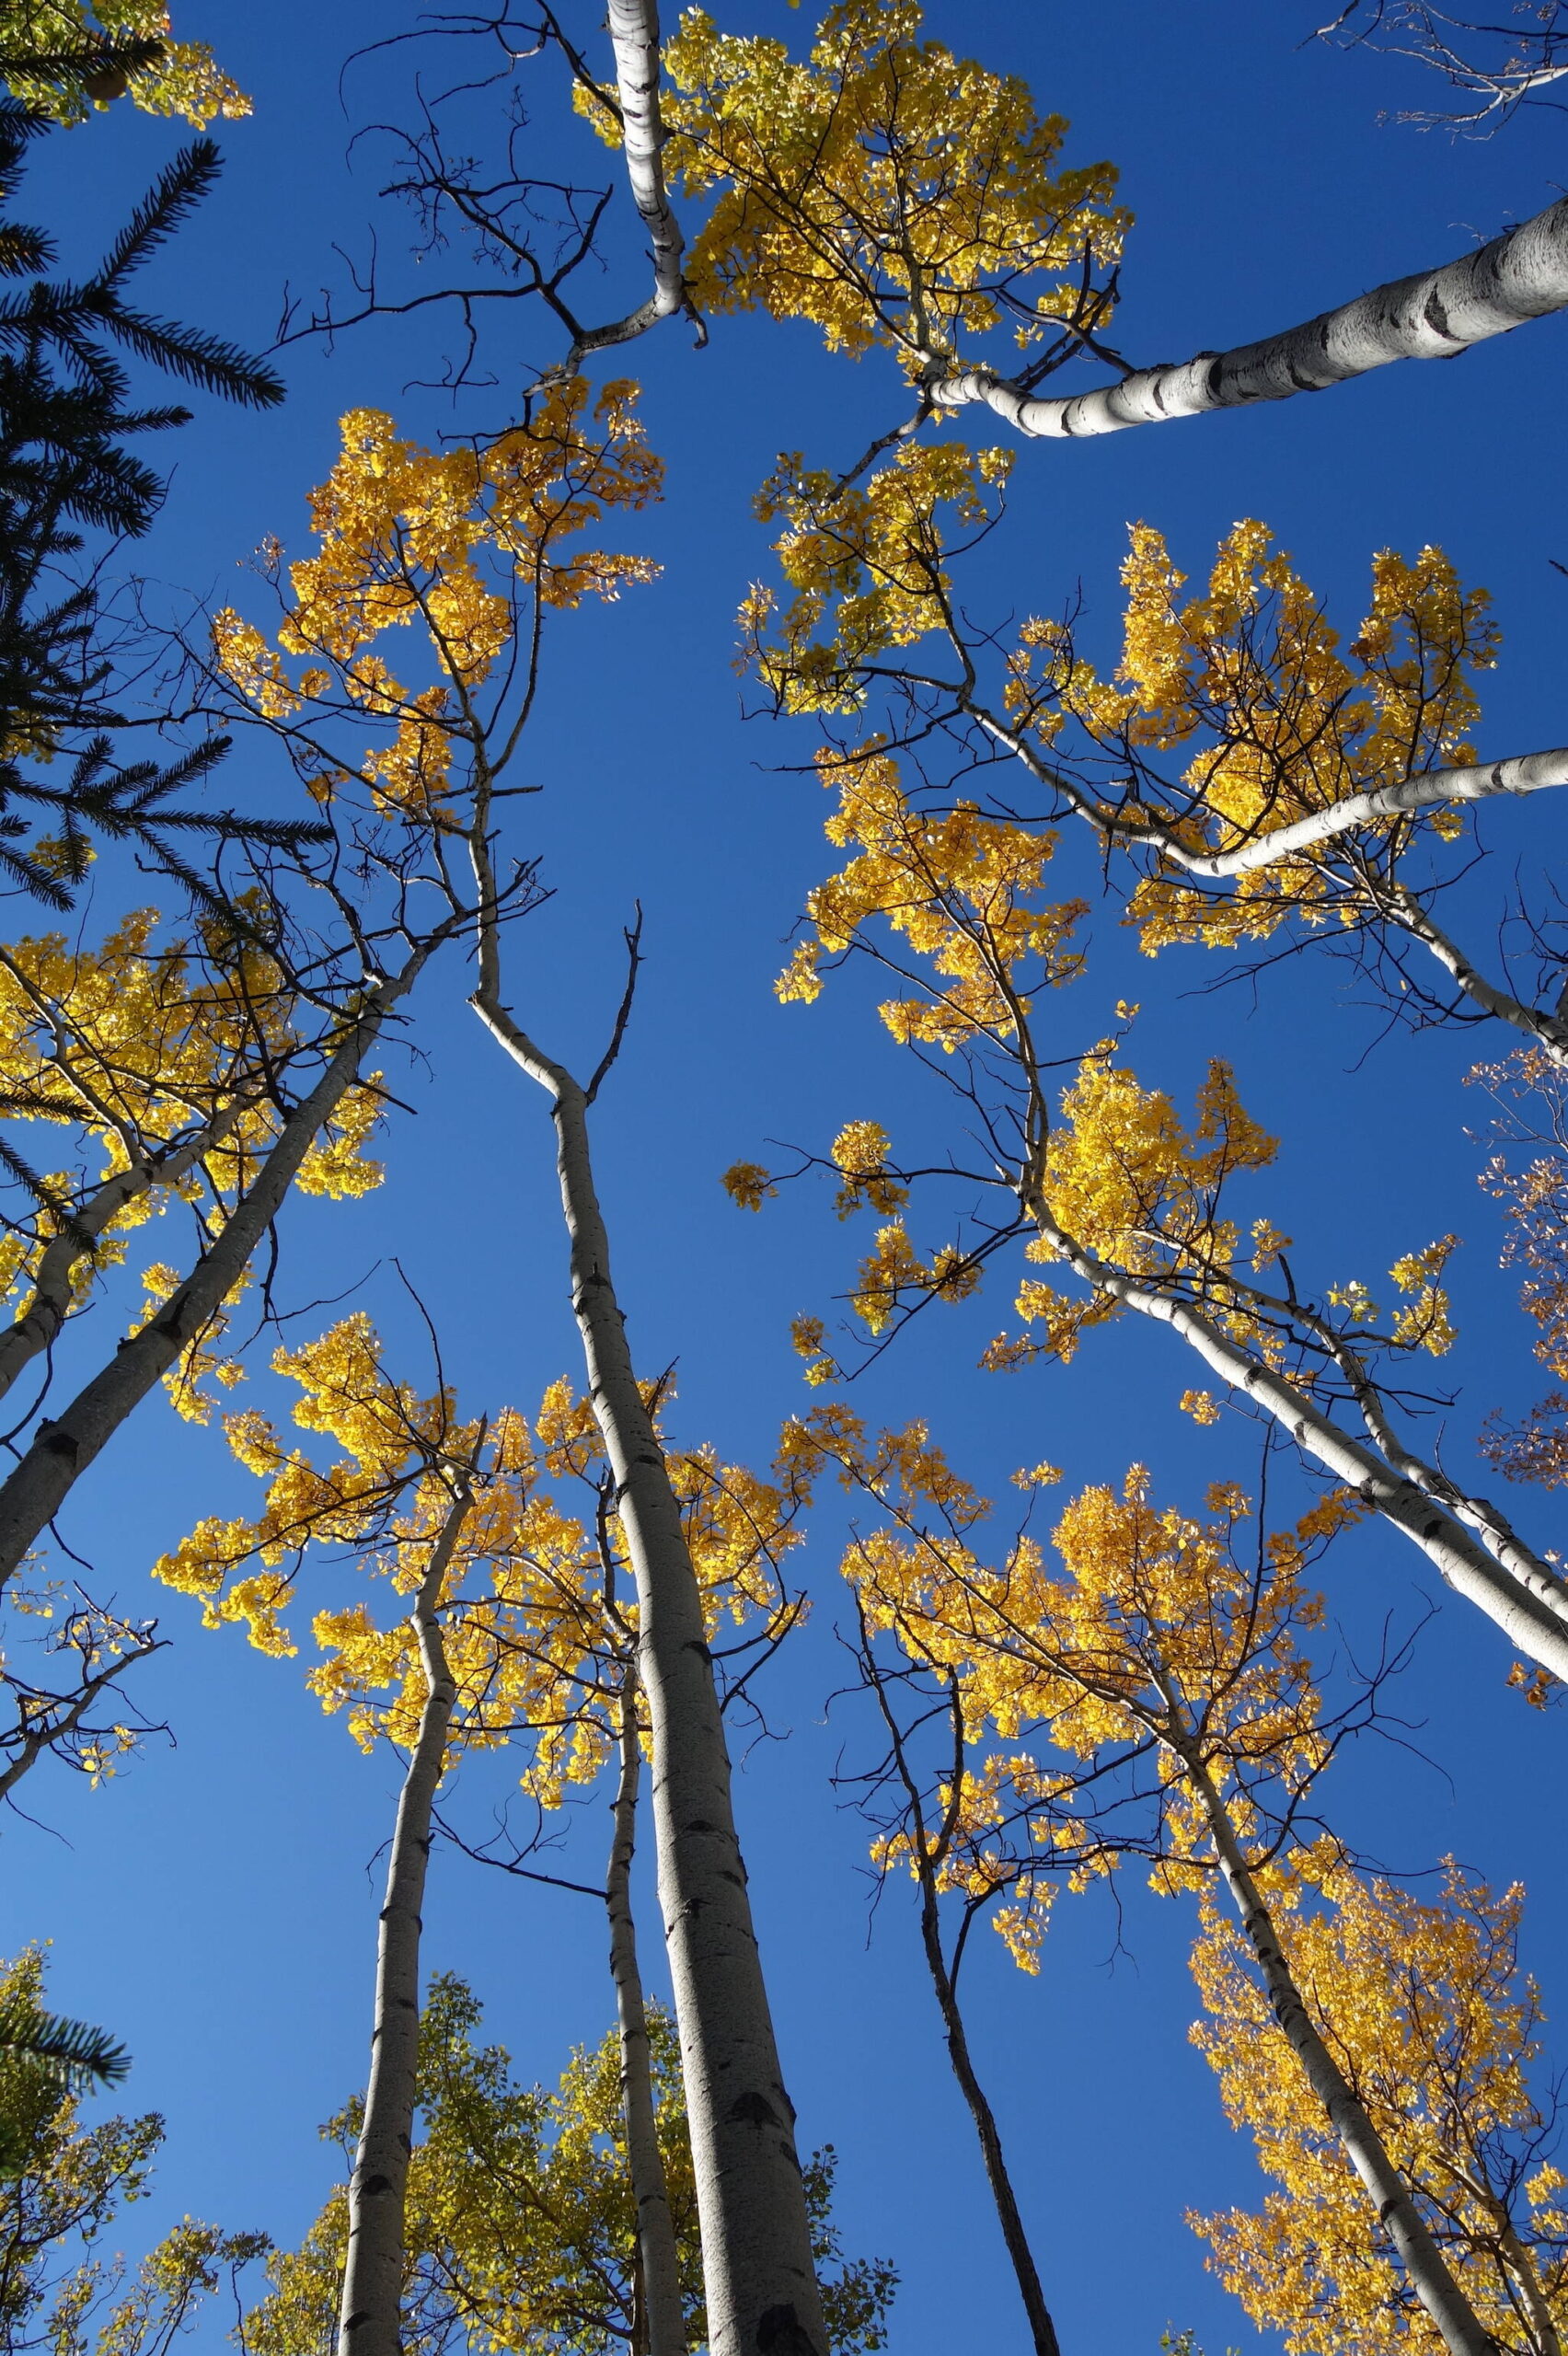 Native aspen trees show their colors on the UAF campus during a recent September. (Photo by Ned Rozell)